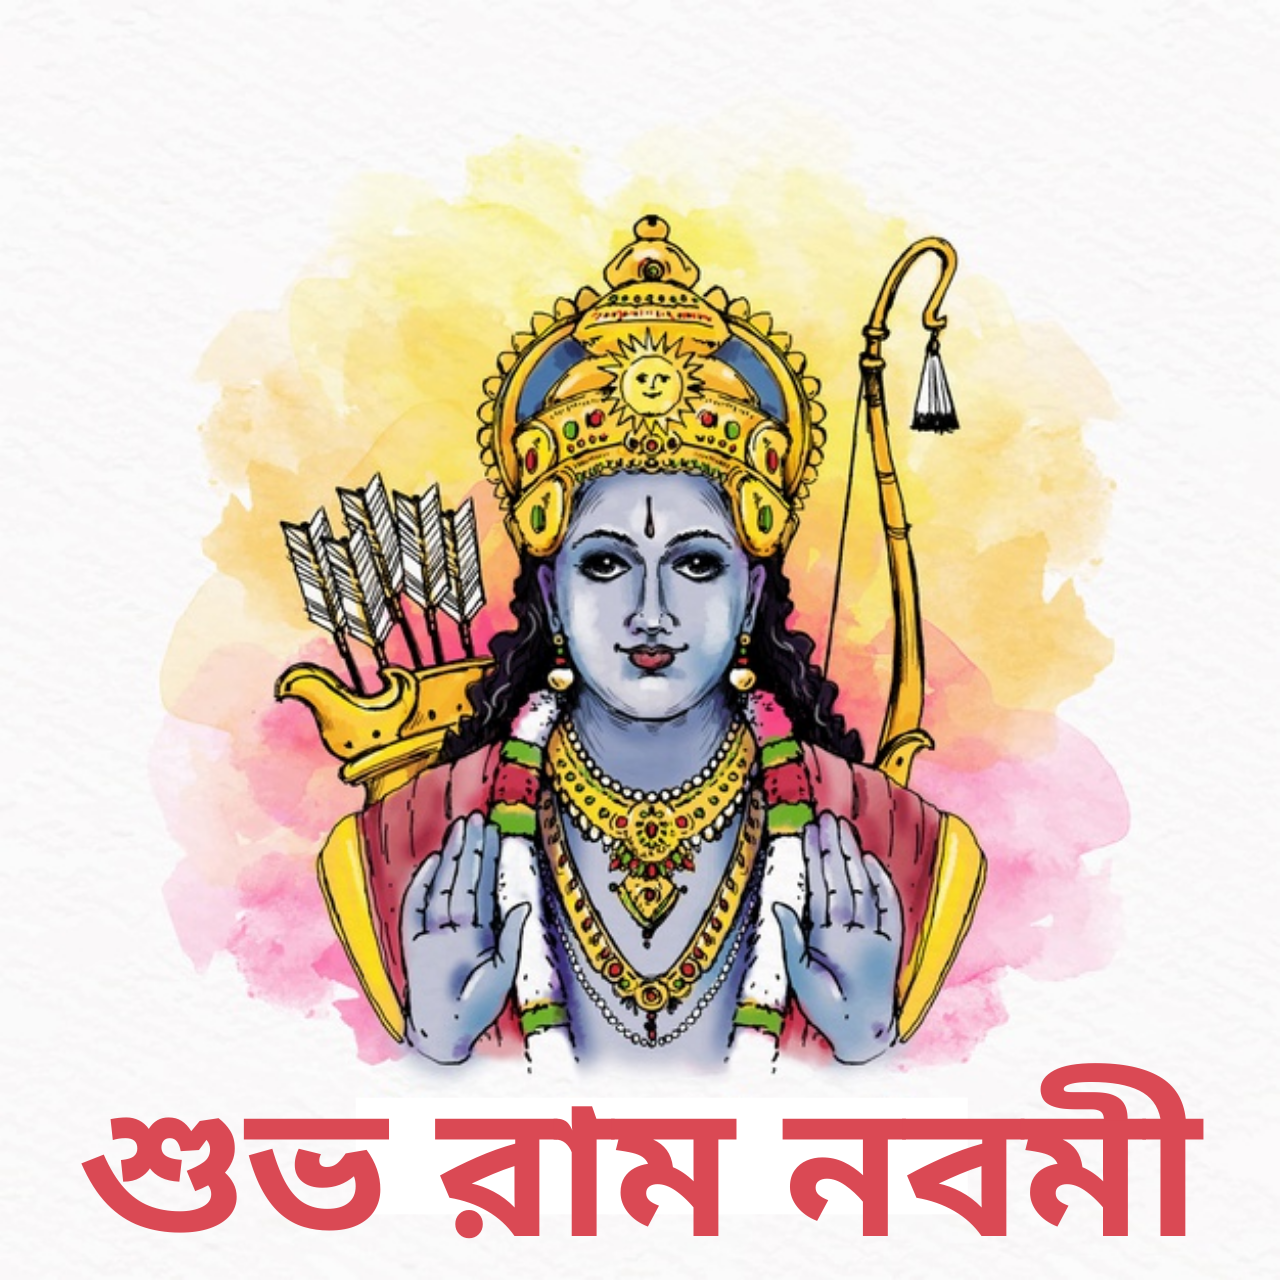 Happy Ram Navami 2021 Wishes in Bengali, Images, Greetings, Messages, and Quotes to Share